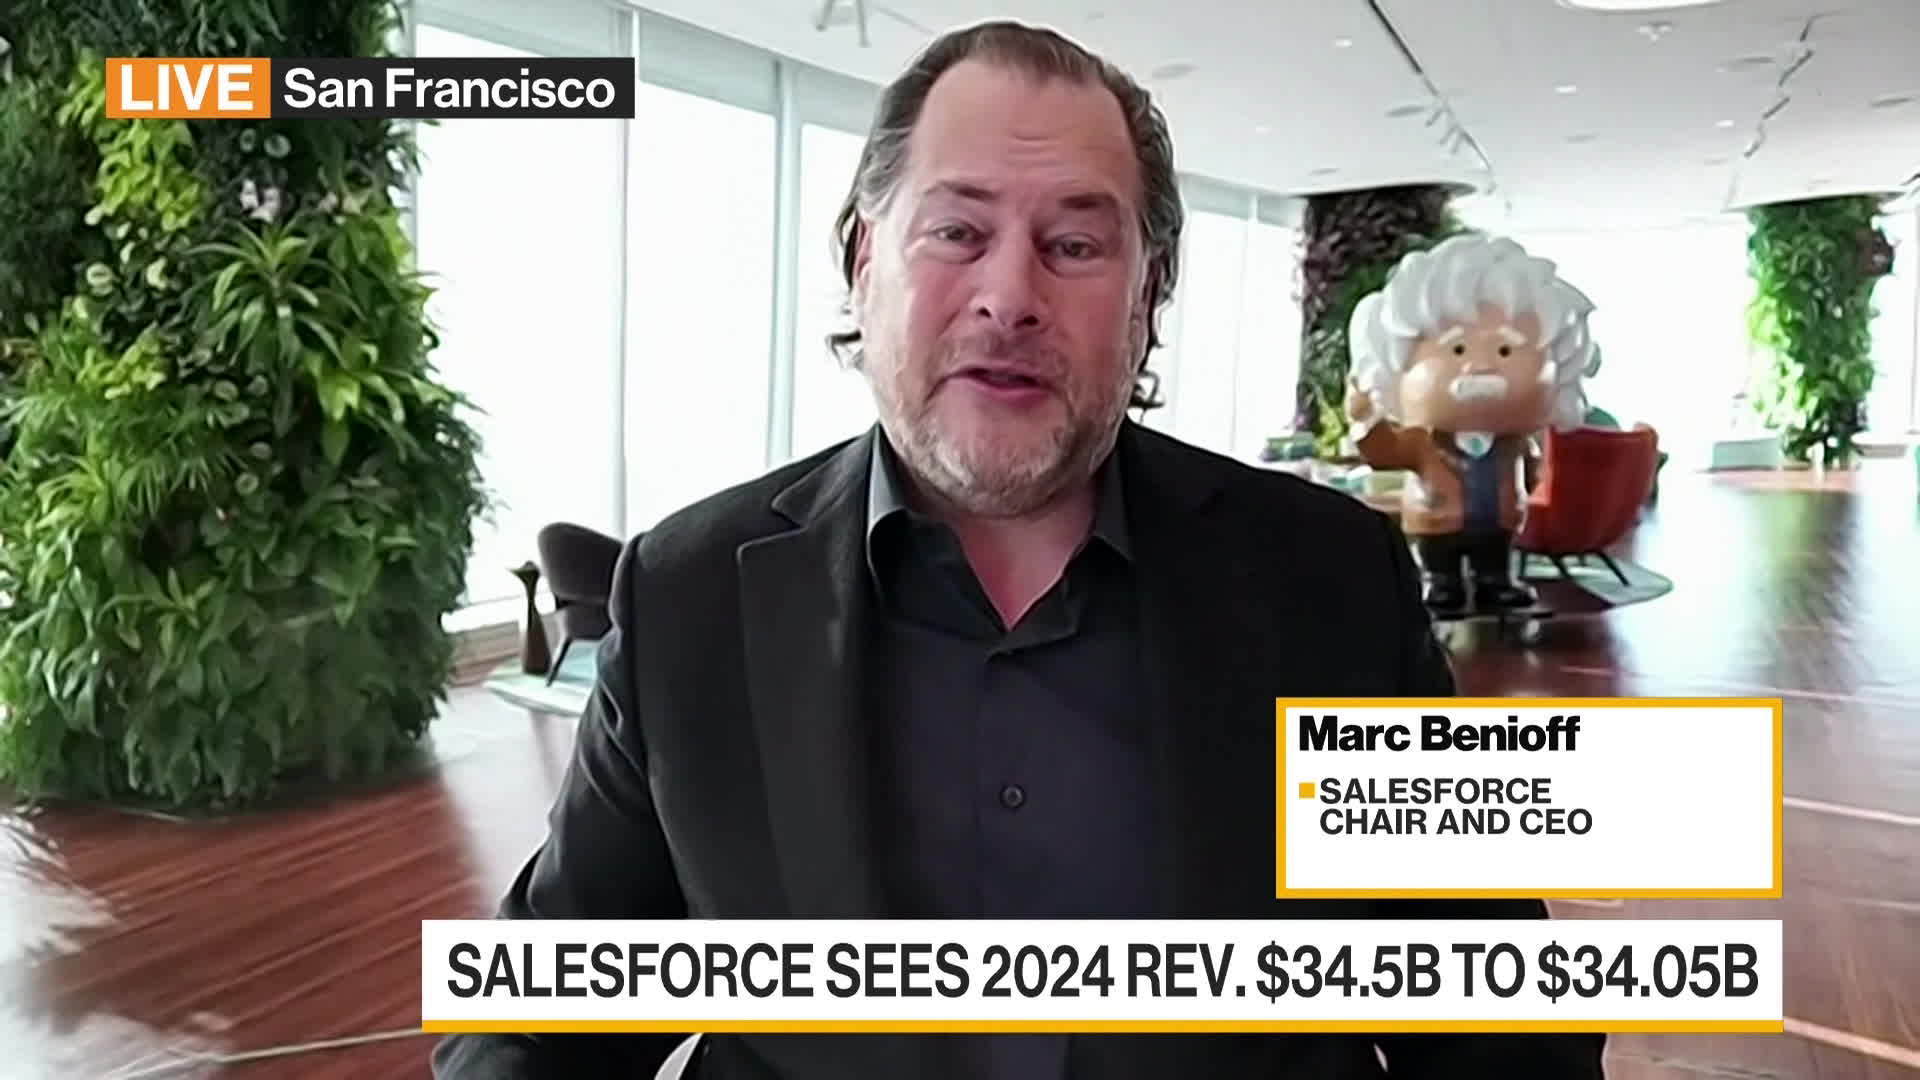 Salesforce earmarks $250 million for AI startup investment